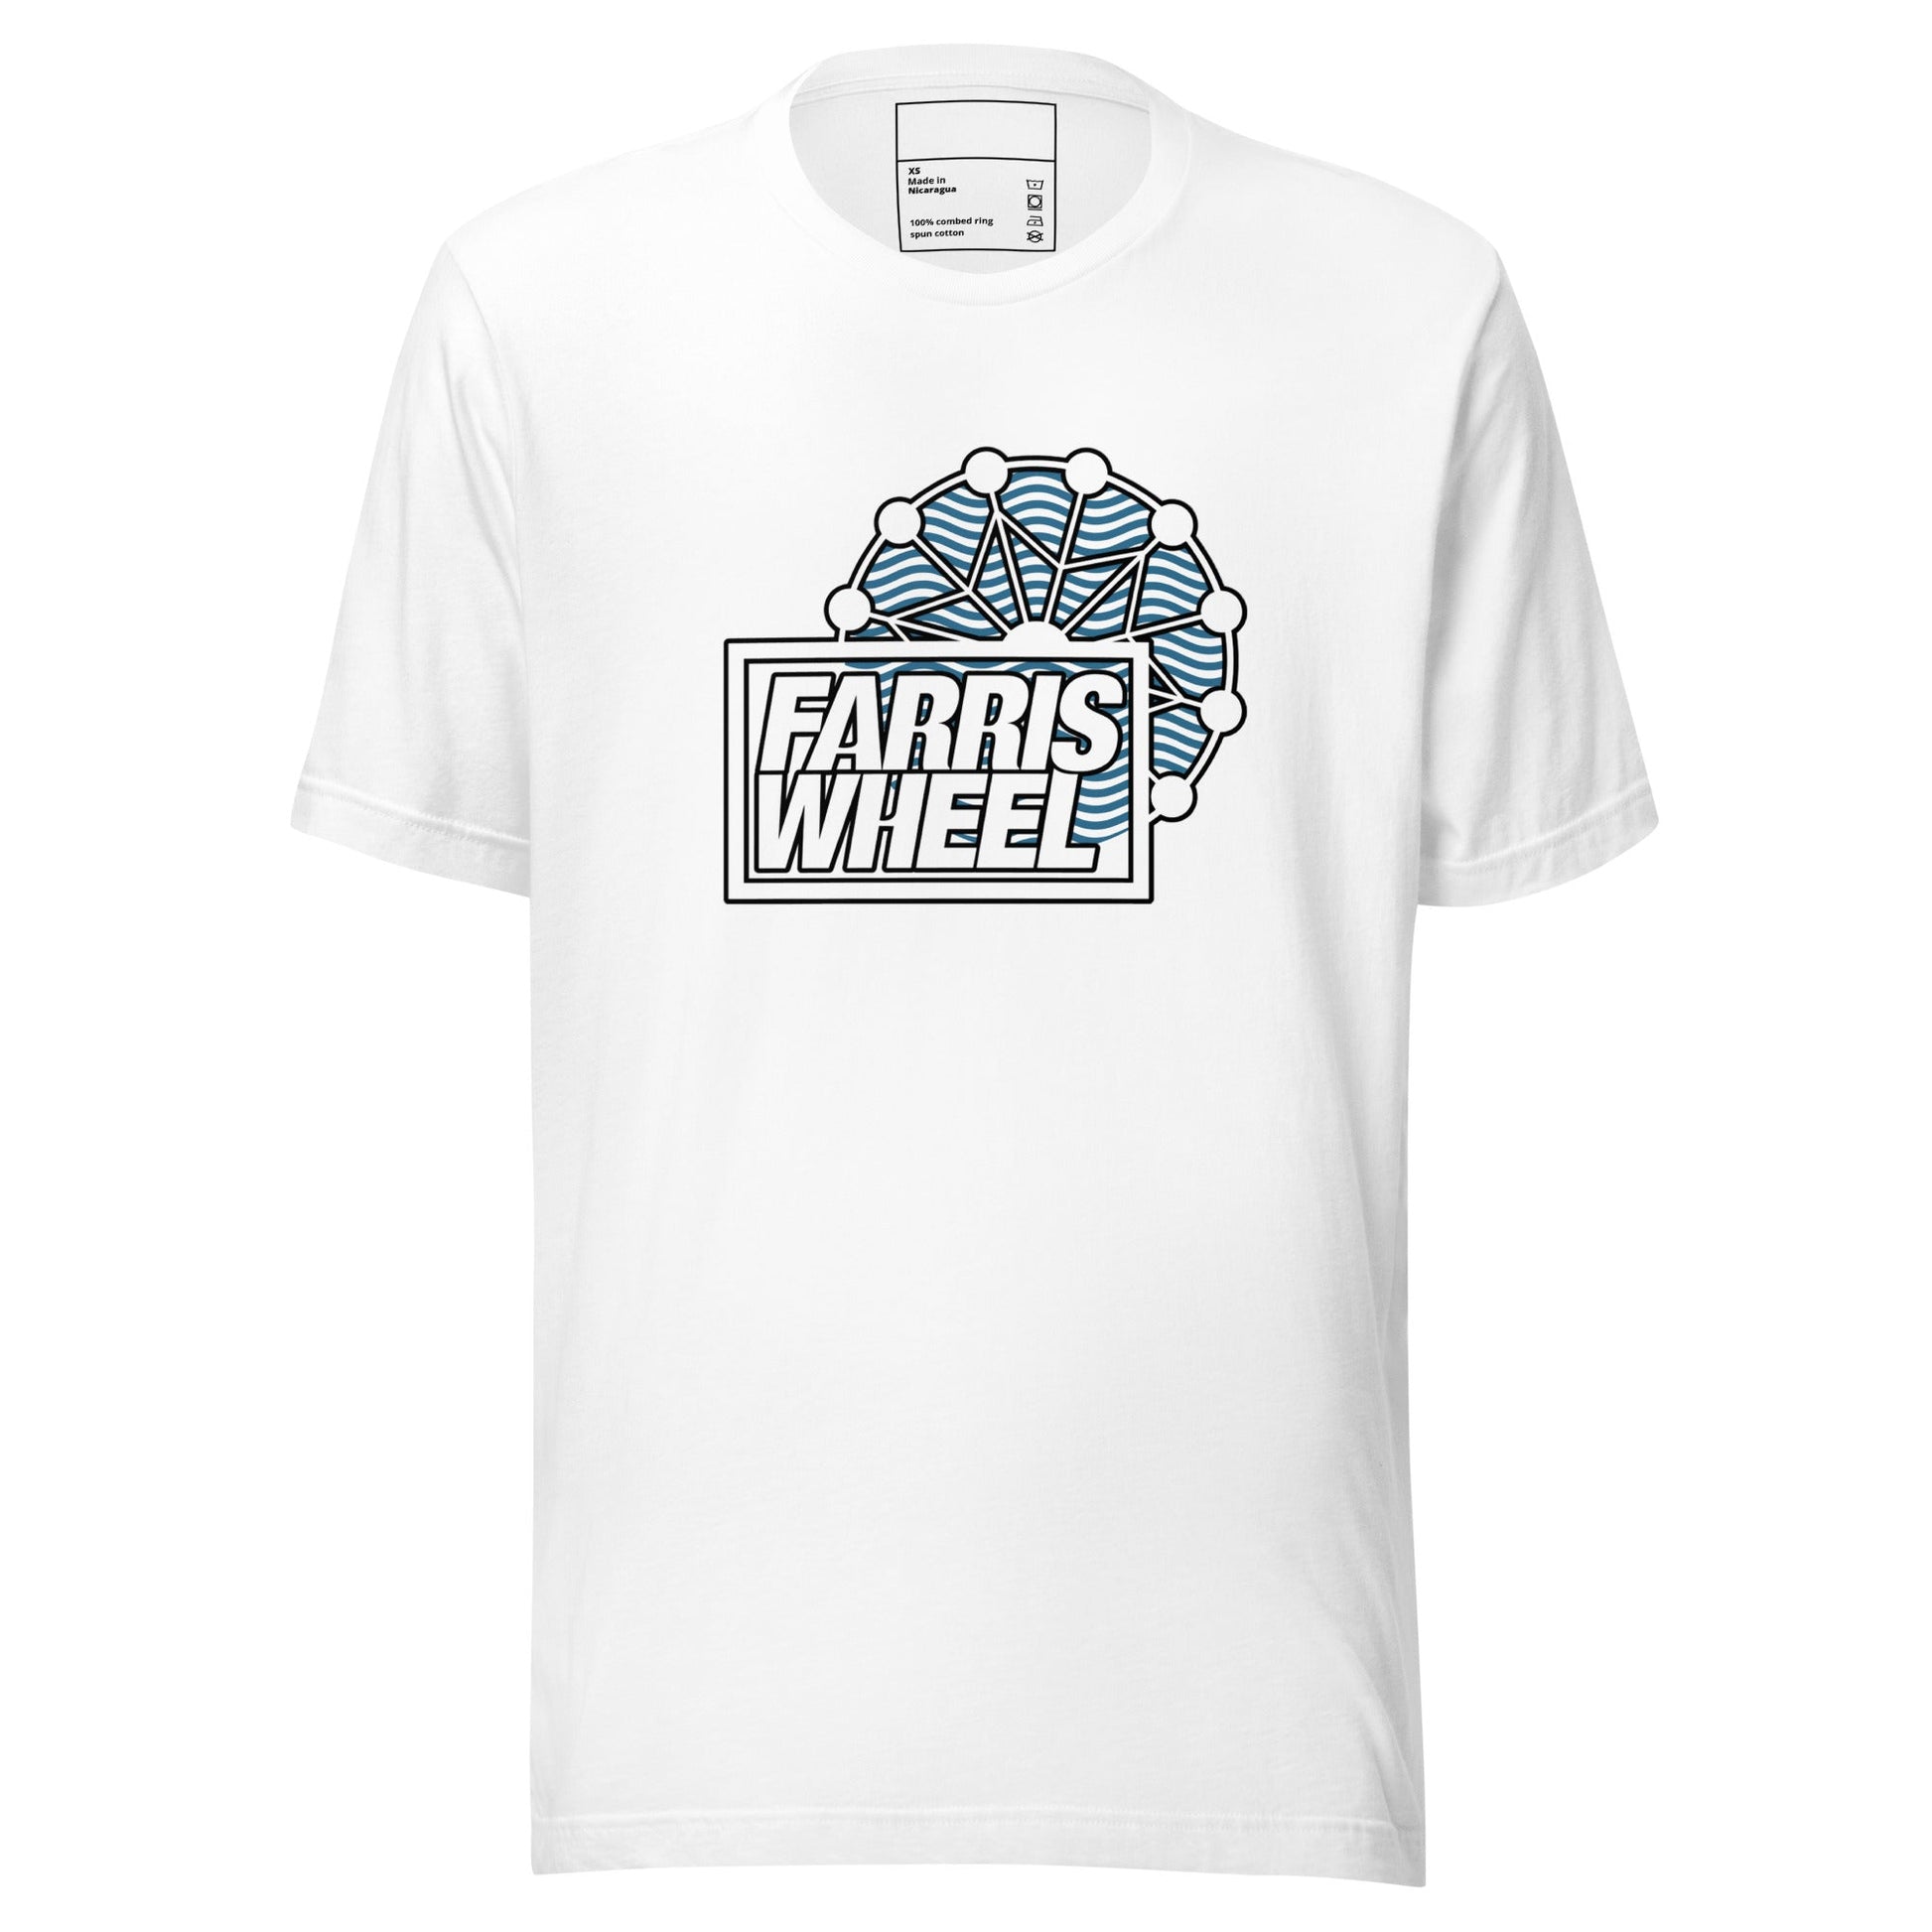 Farris Wheel Blue Wave Unisex T-shirt - BeExtra! Apparel & More